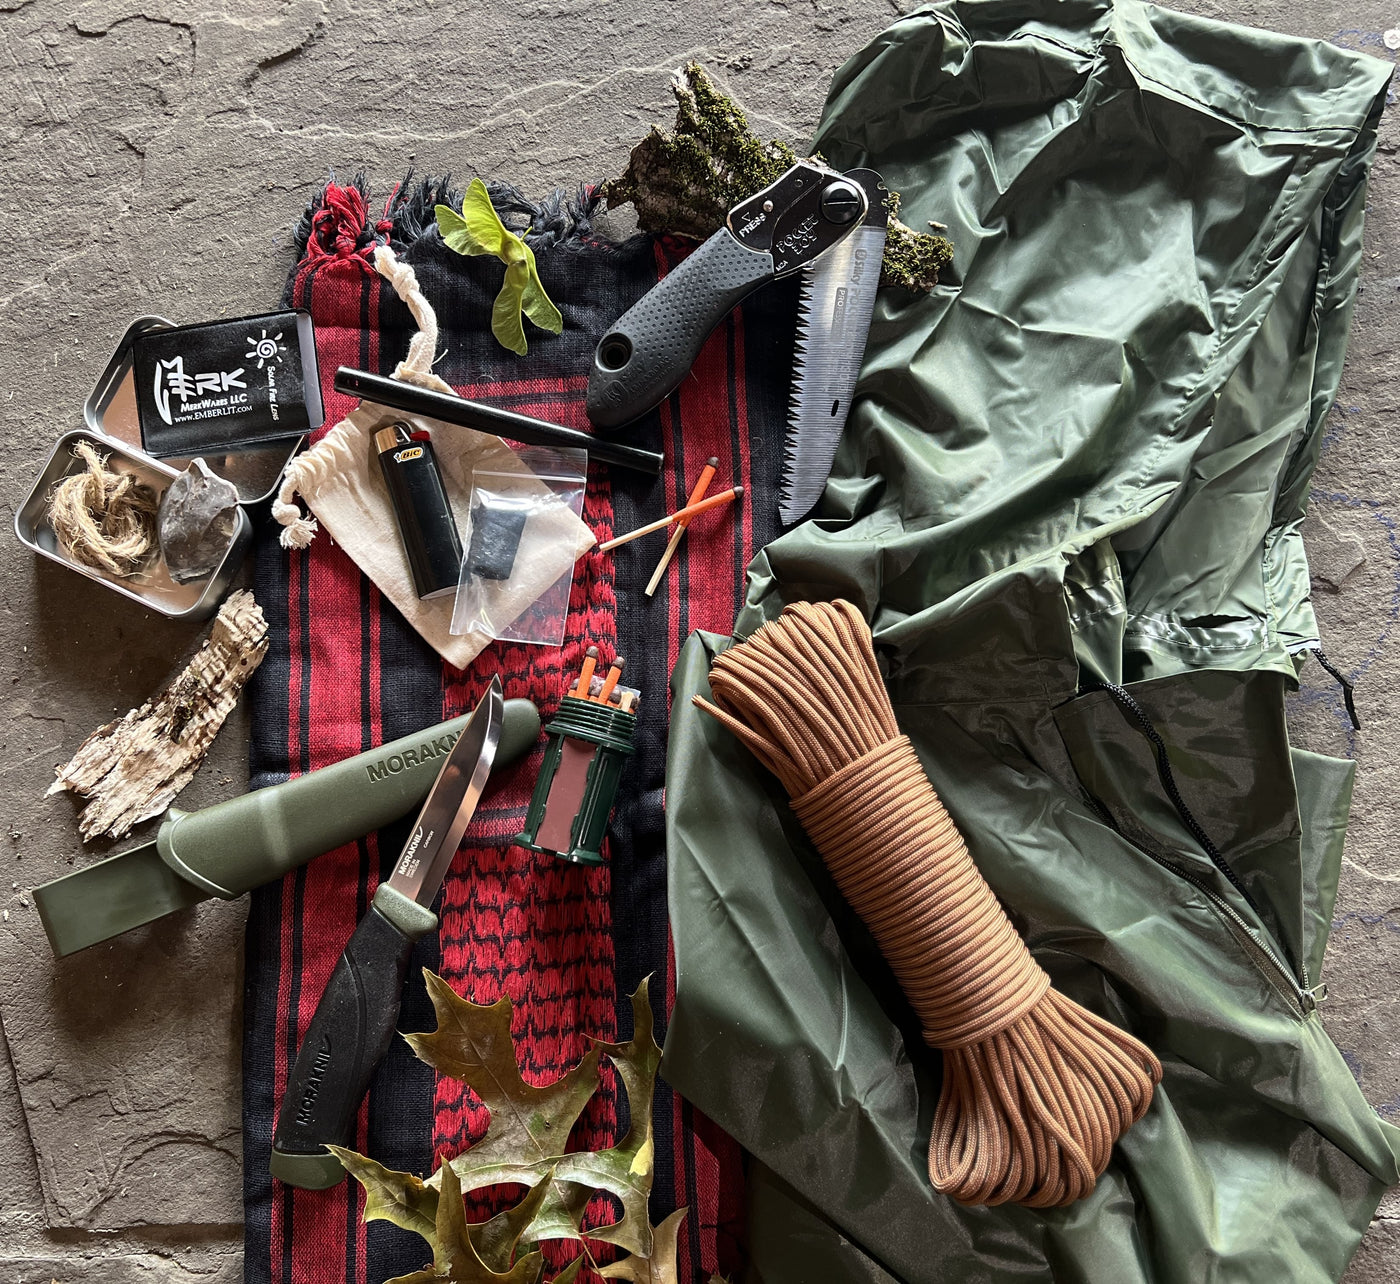 Wilderness Canoeing: Personal Bushcraft & Survival Kit Choices